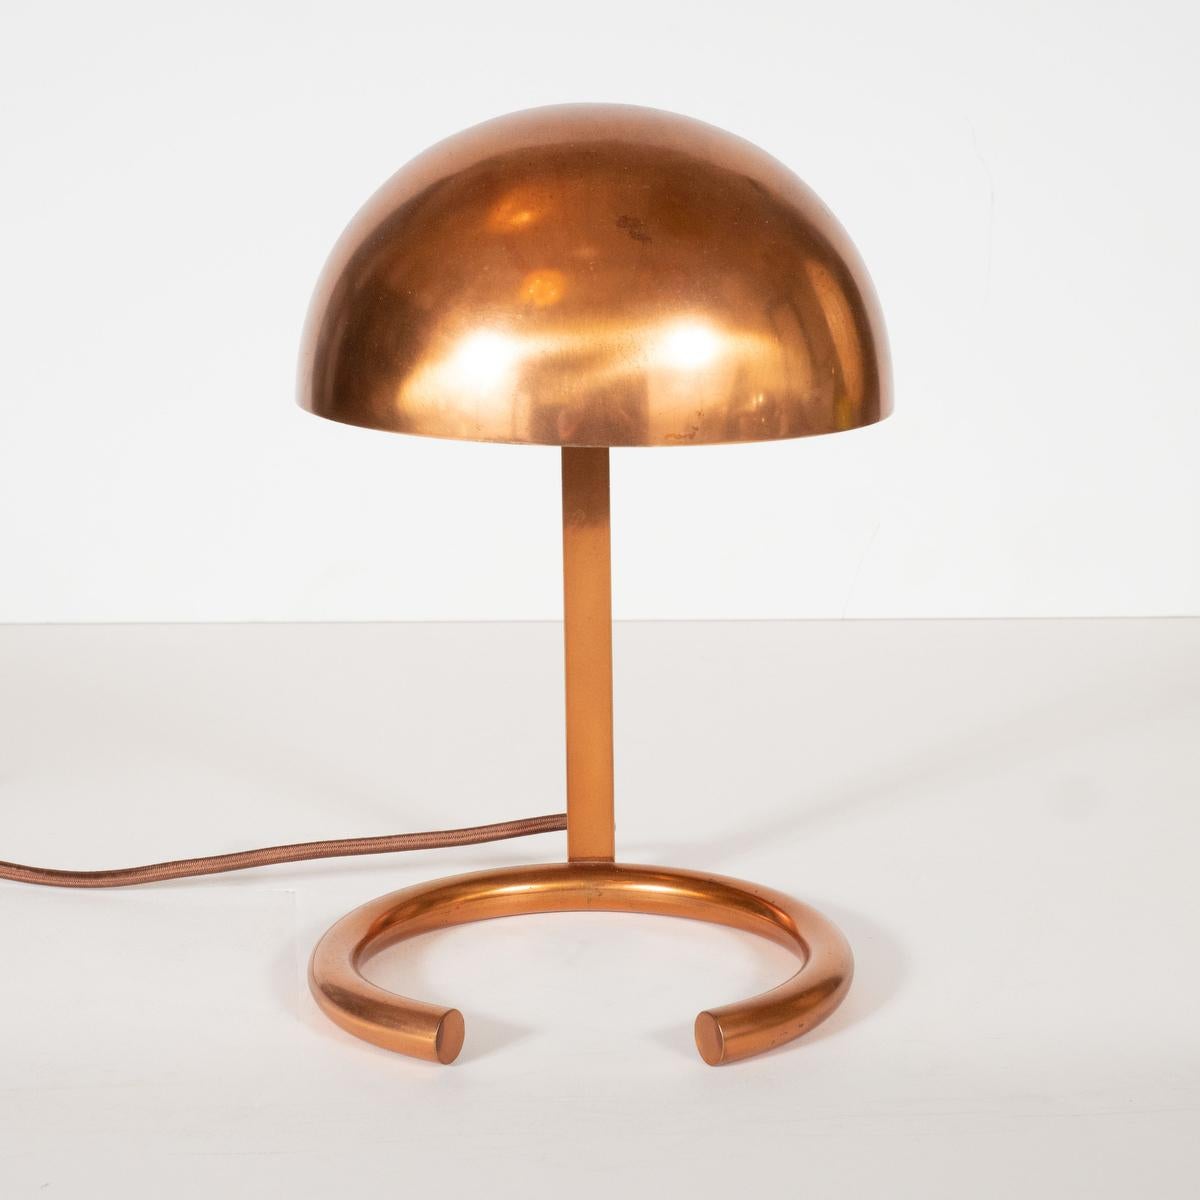 French  Modernist Copper Desk Lamp by Adnet For Sale